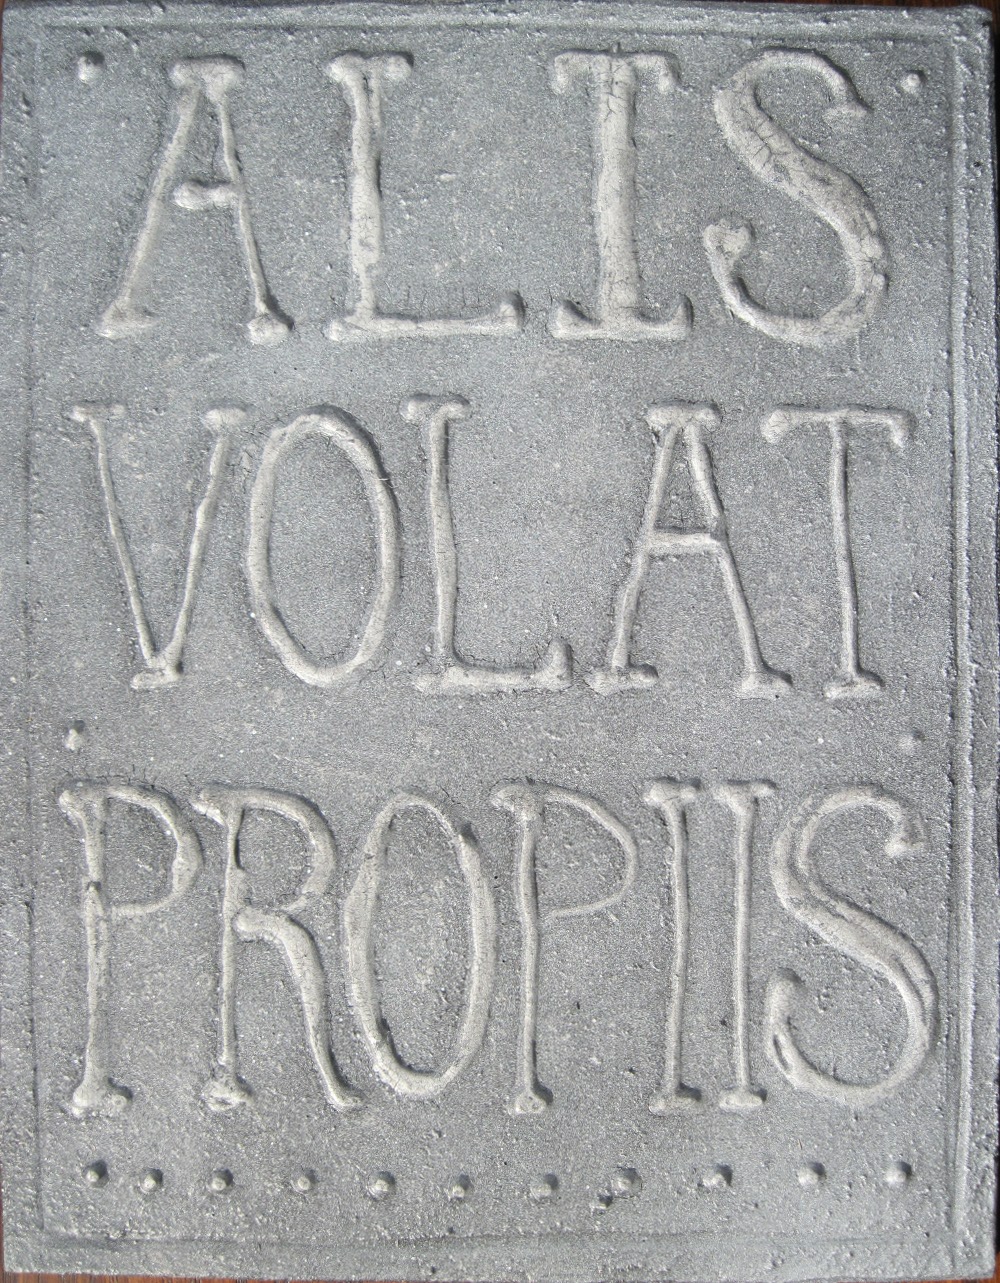 a welcome mat that says all is volati propis